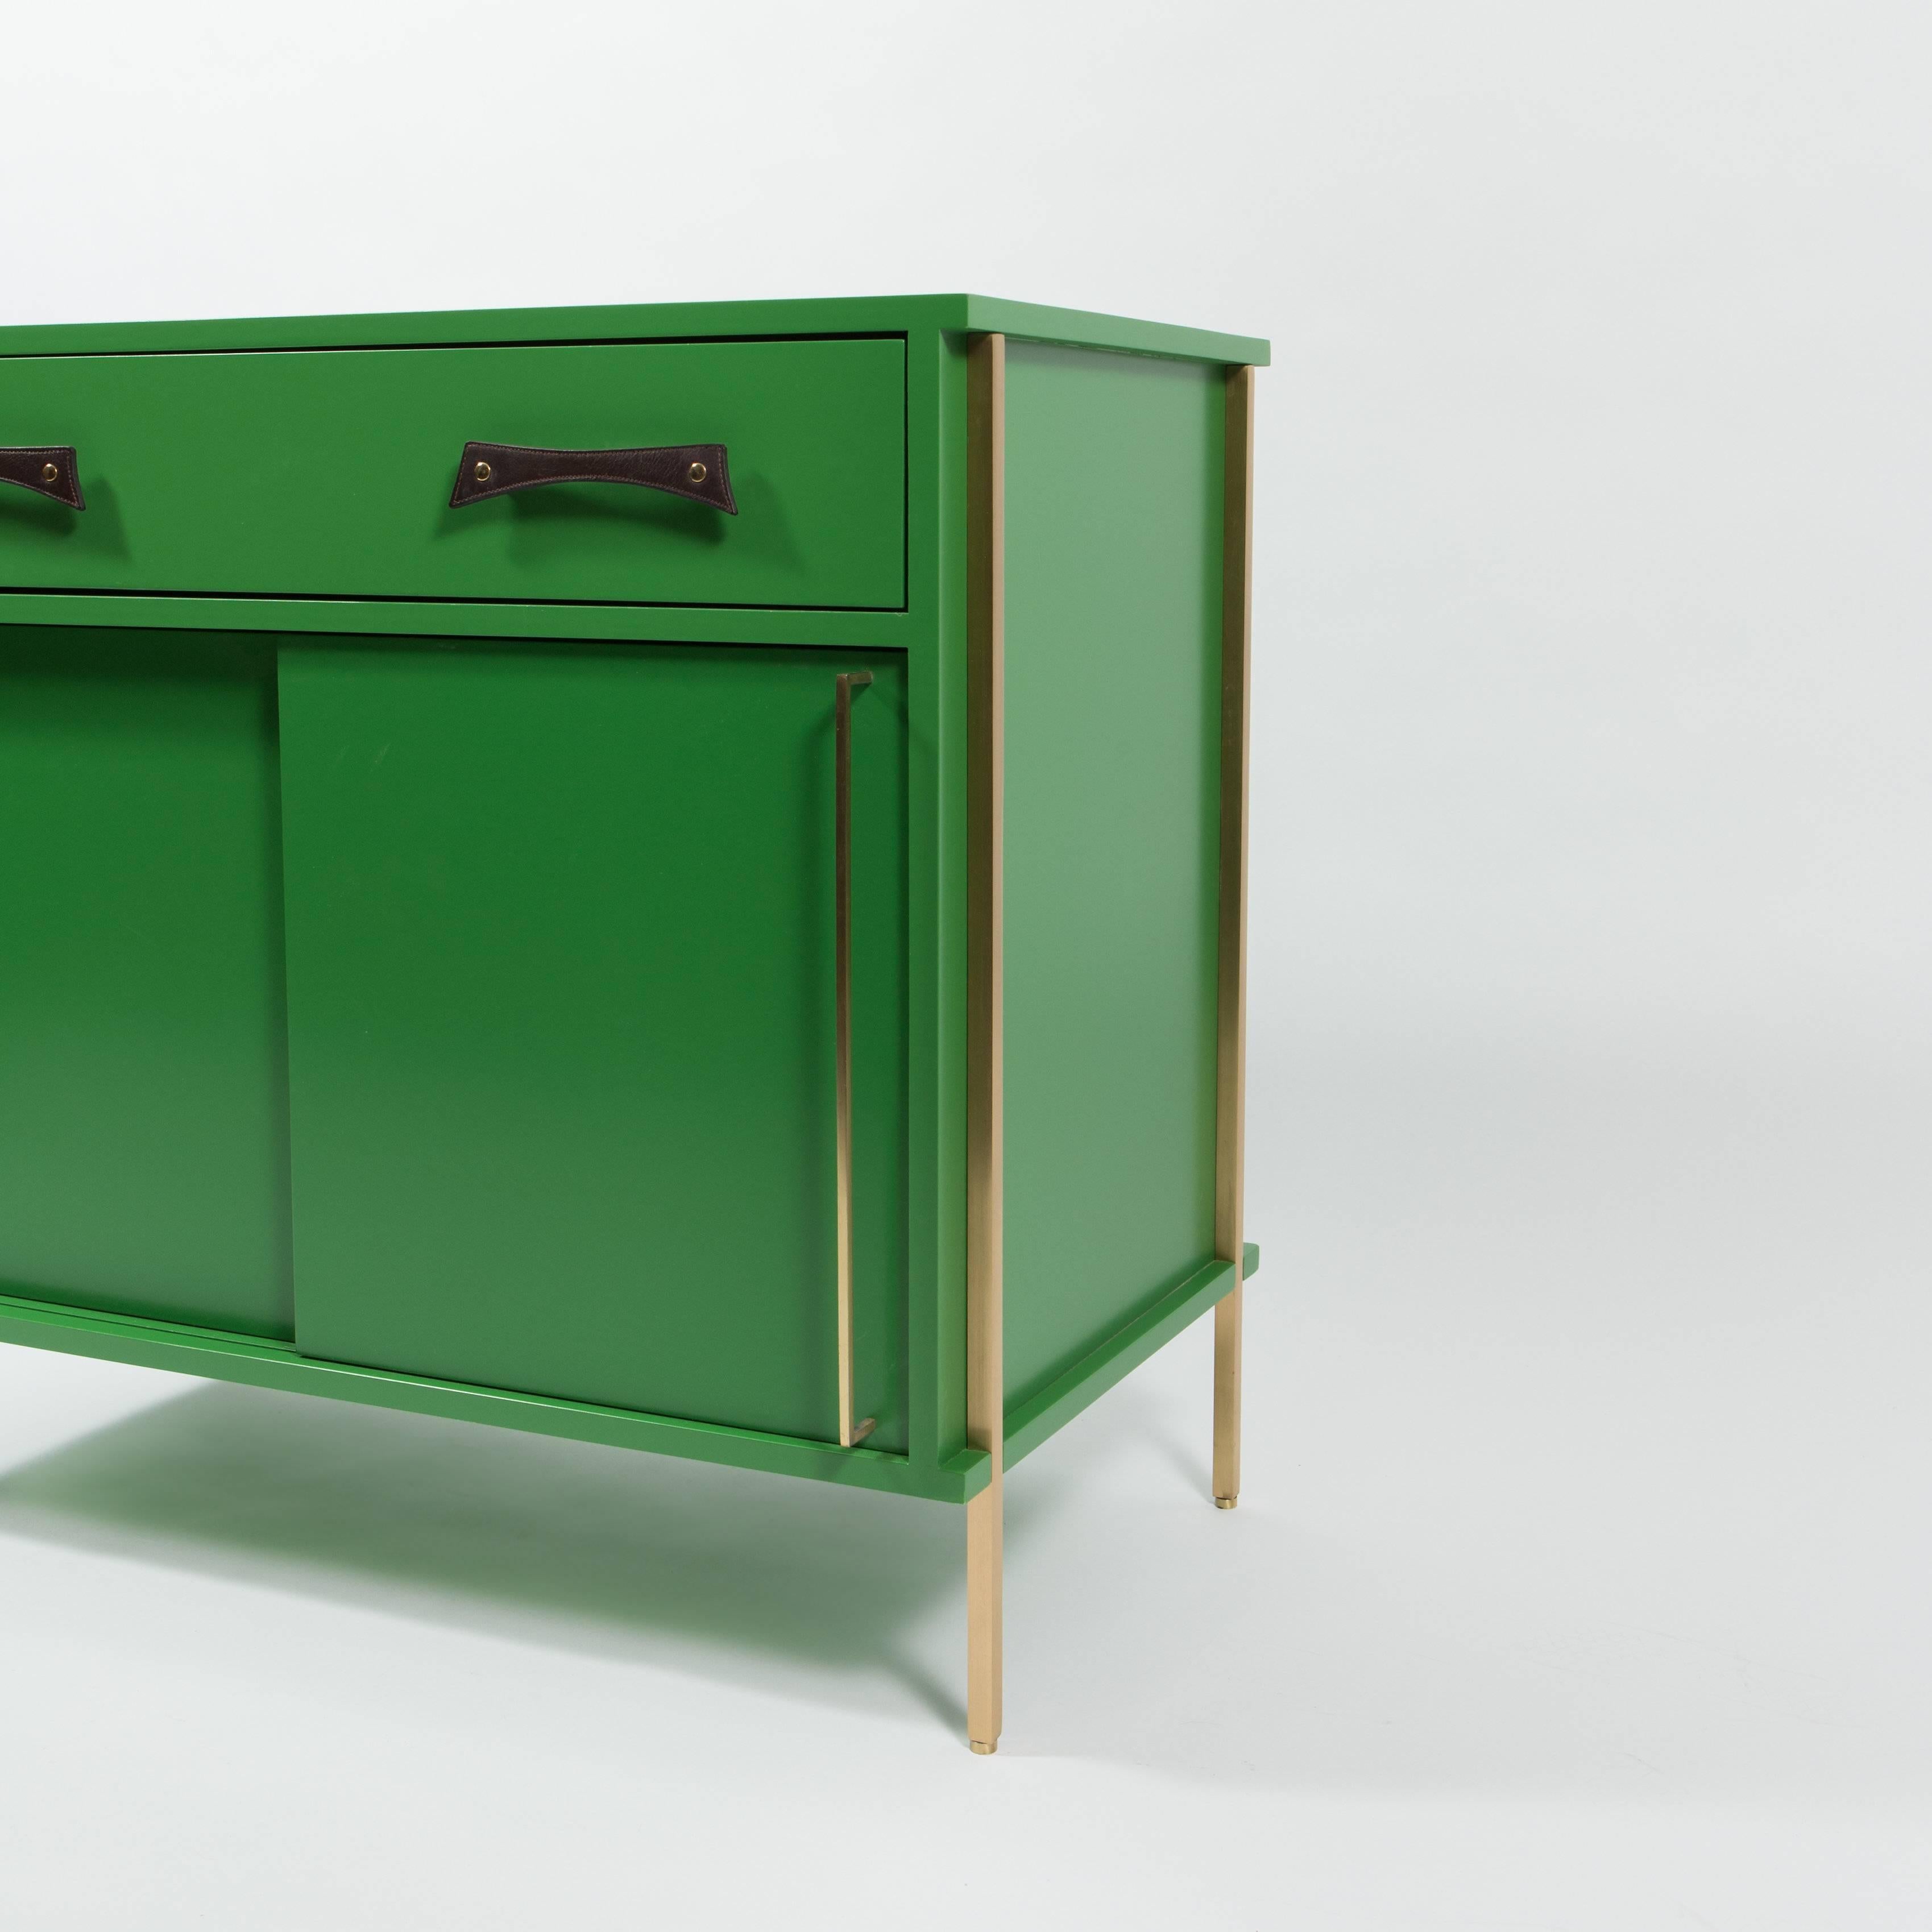 Made to order sliding  door cabinet with drawer in RAL Grass Green lacquer. Handmade leather handles on drawer by Jutta Neumann and hand made brass handles on doors.